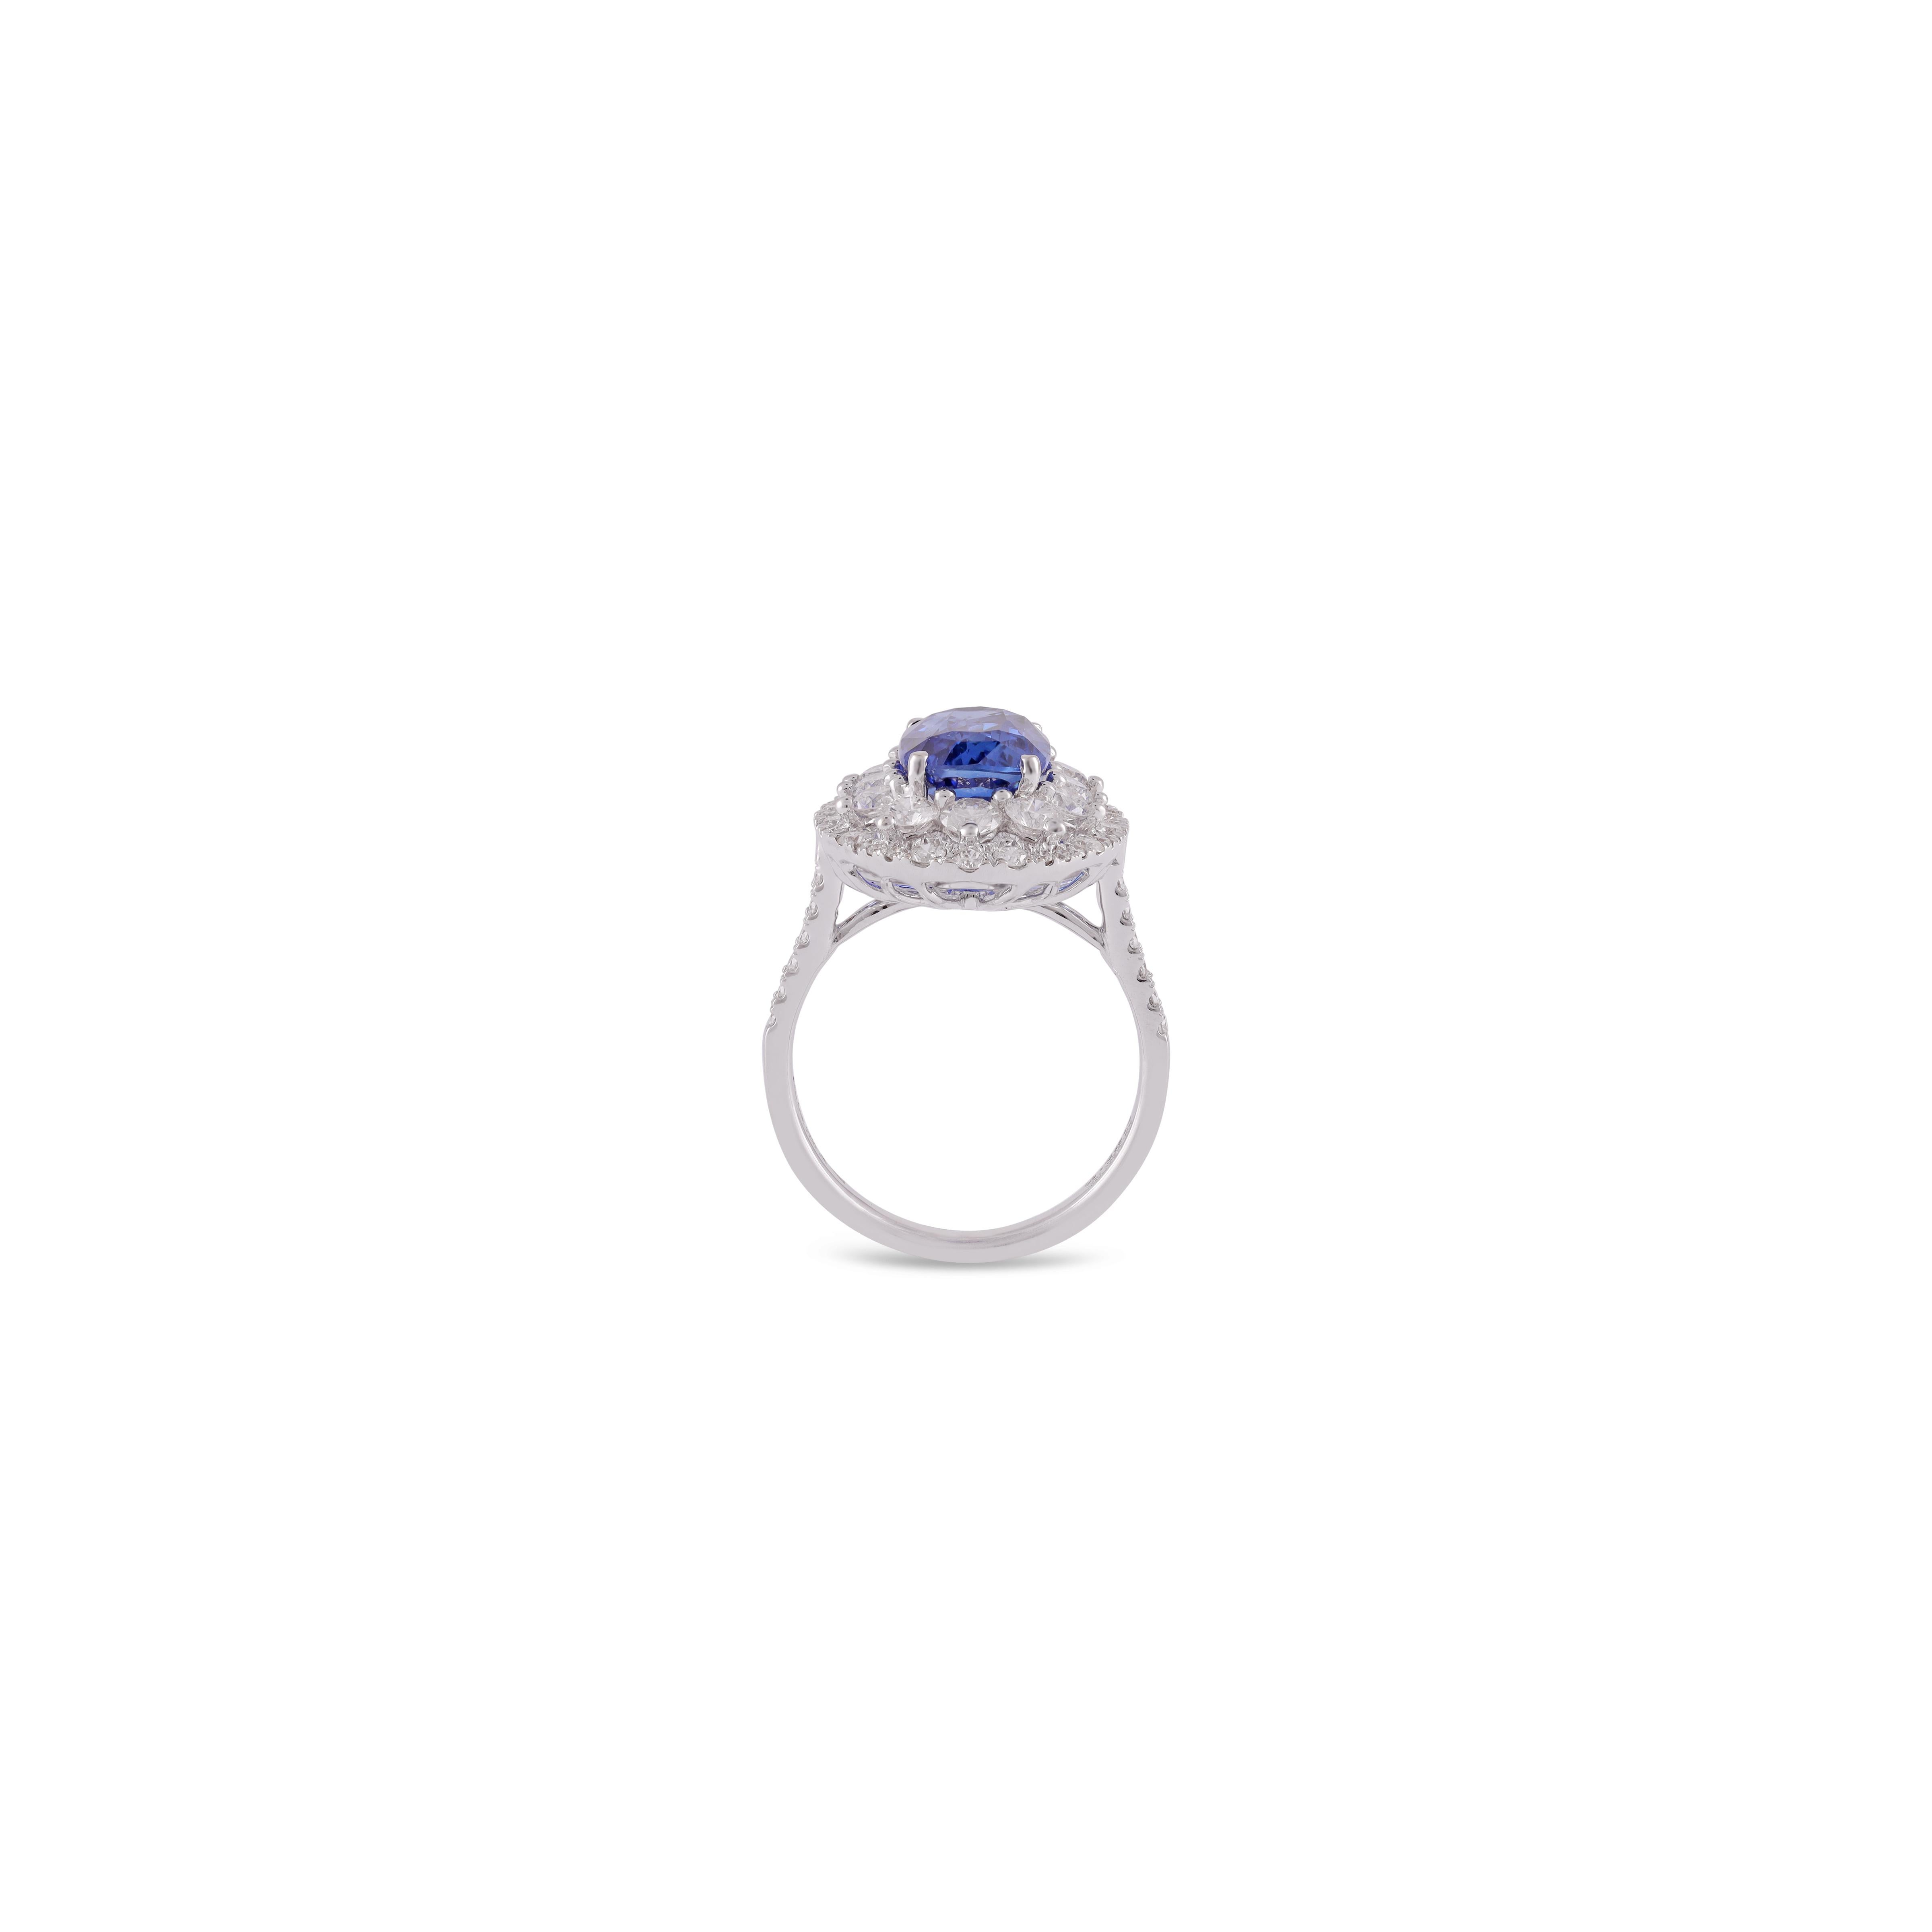 Modern 3.97 Cts High Value Clear Blue Sapphire & Diamond Cluster Ring in 18k White Gold